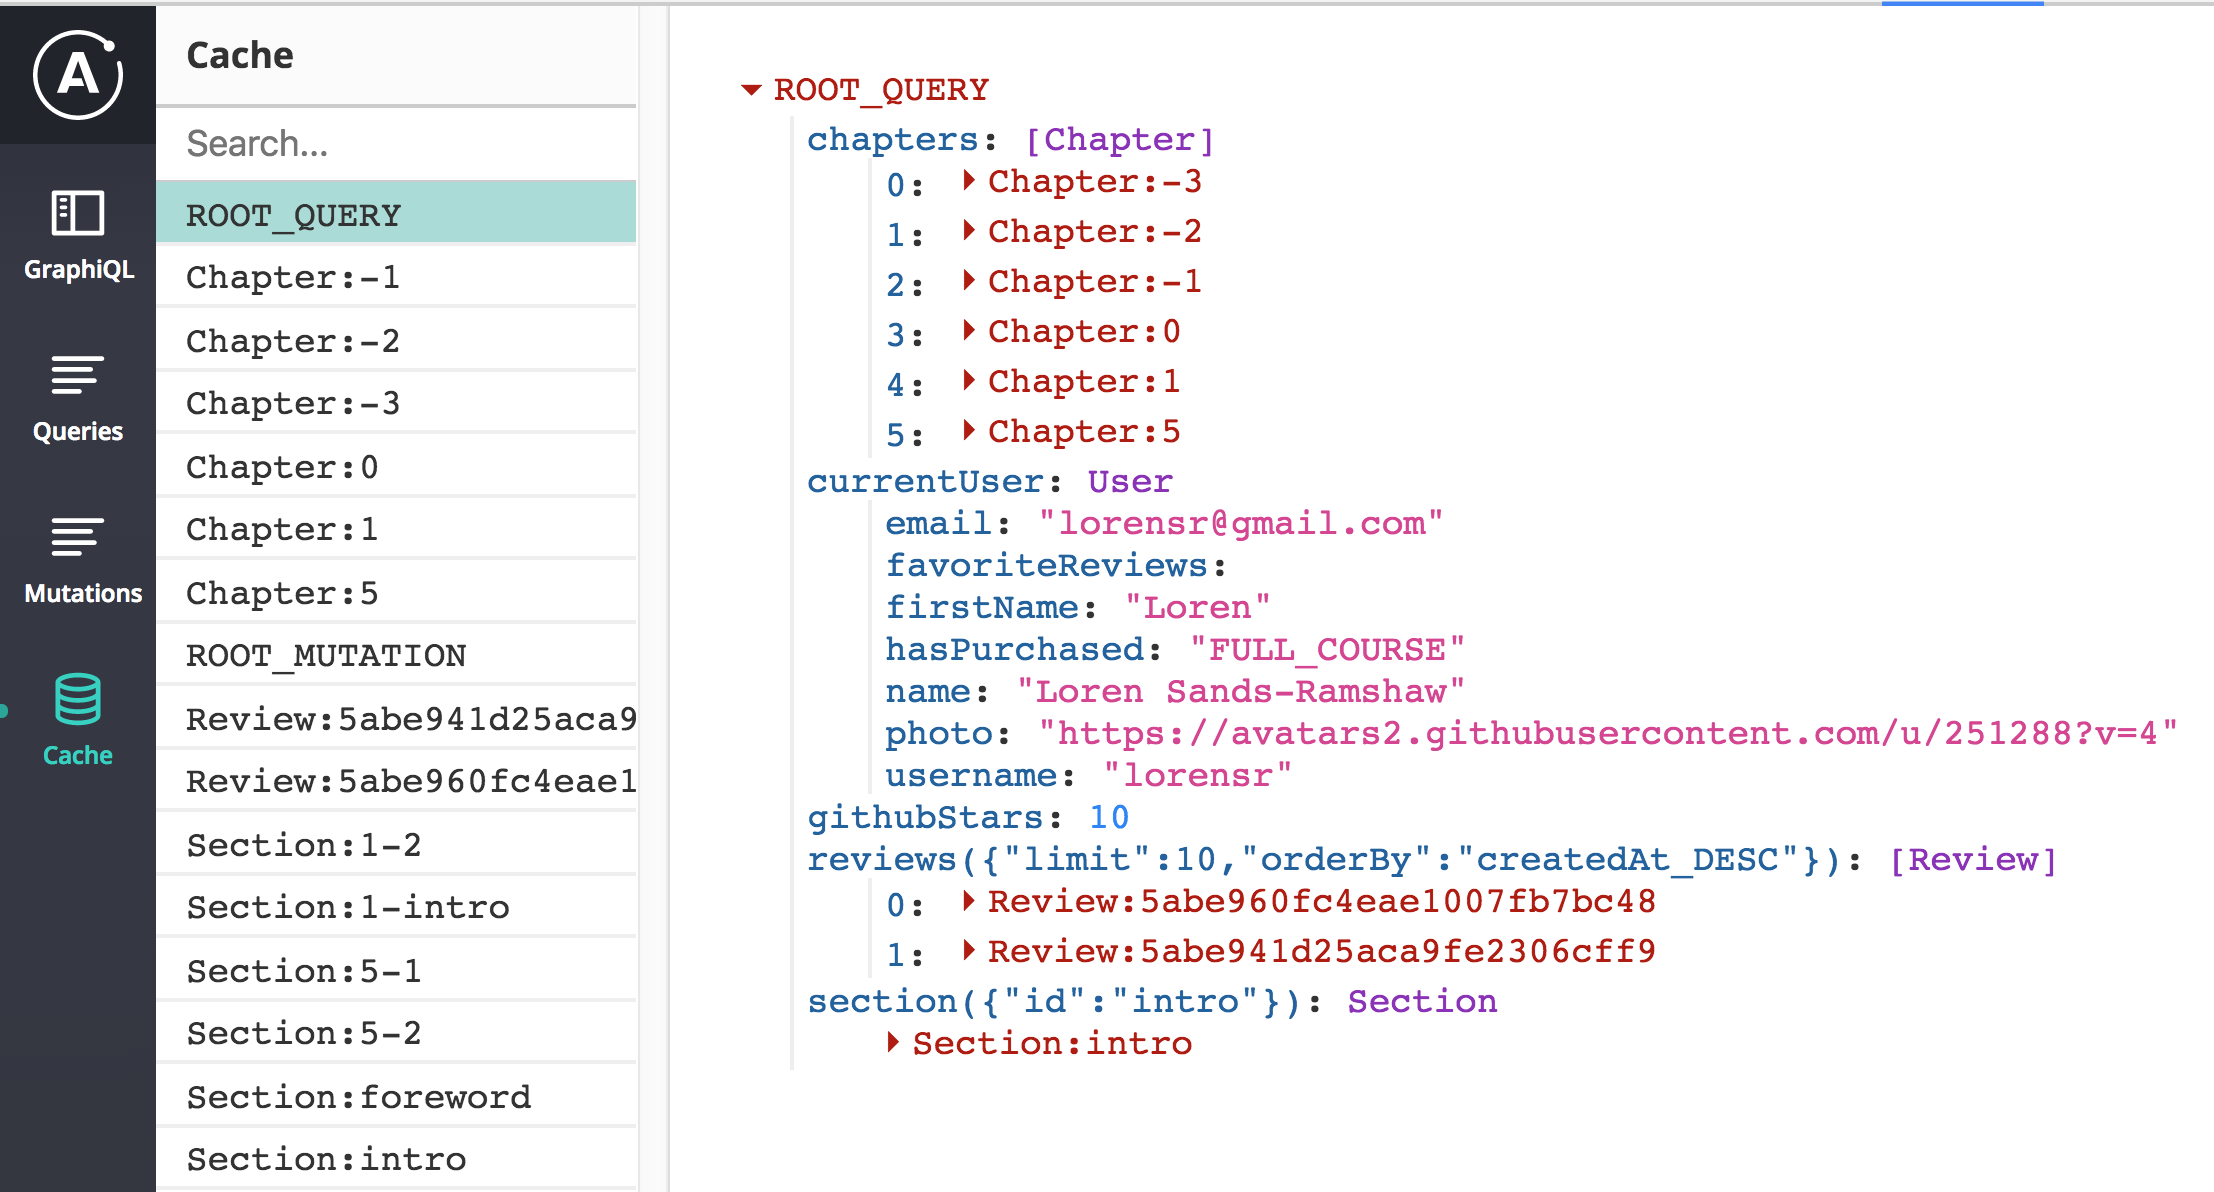 View of the cache in devtools